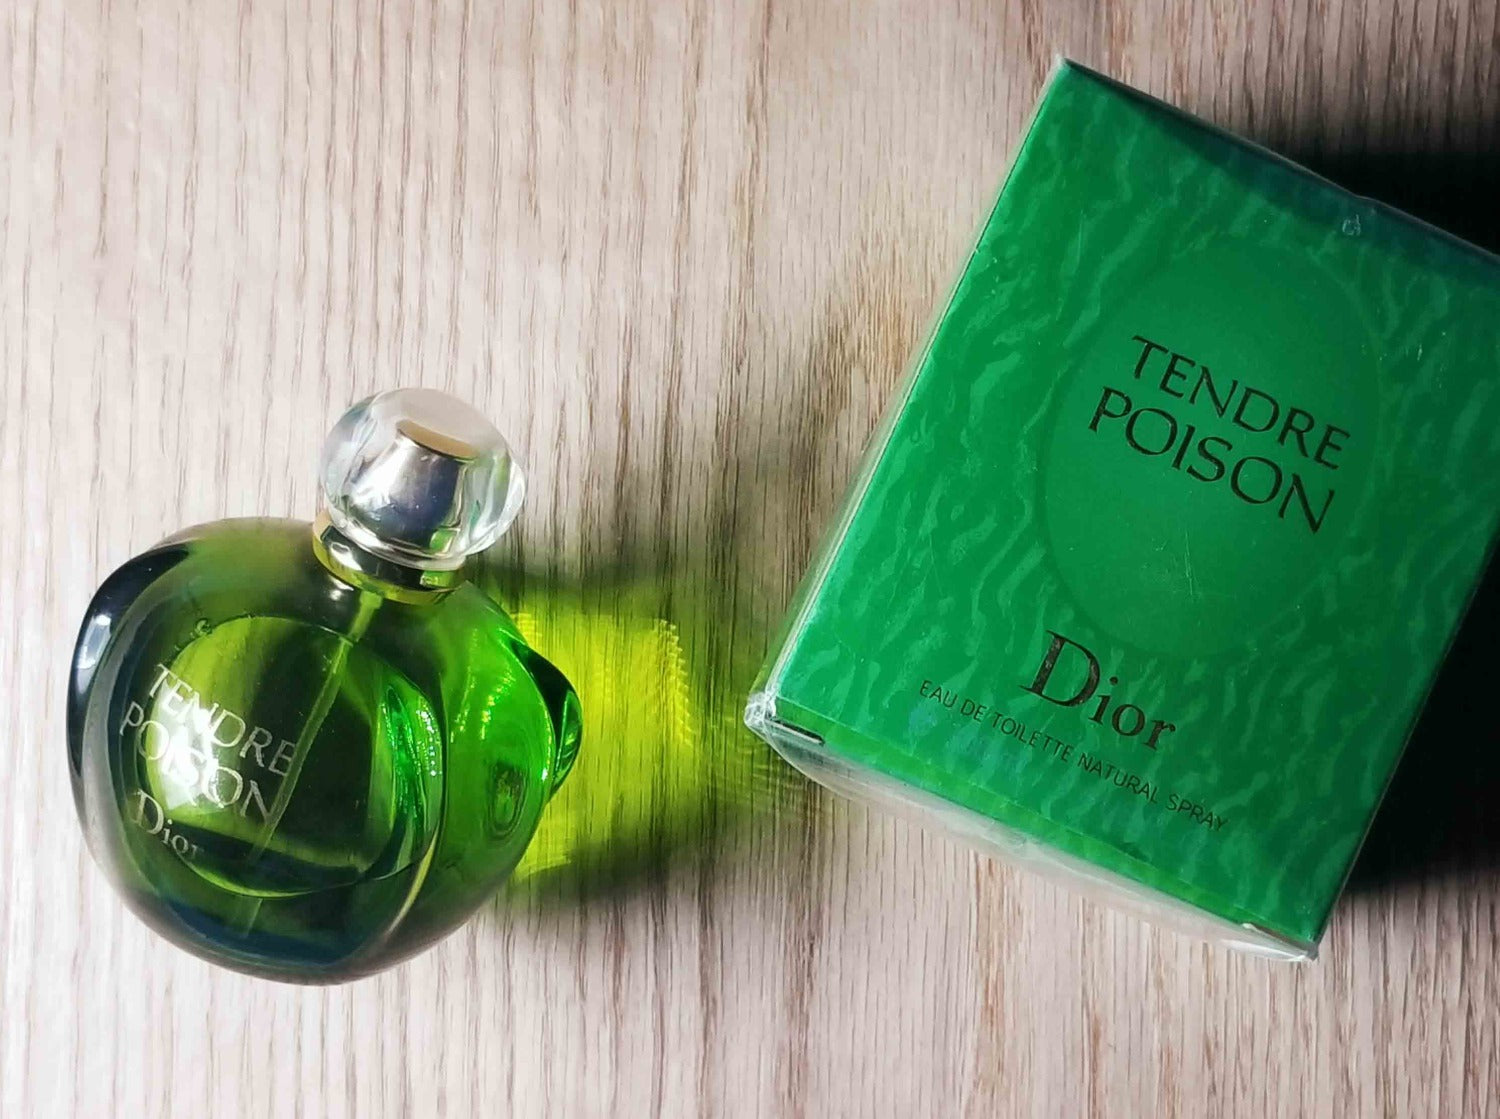 Tendre Poison by Christian Dior EDT Spray 100 ml 3.4 oz Tester OR